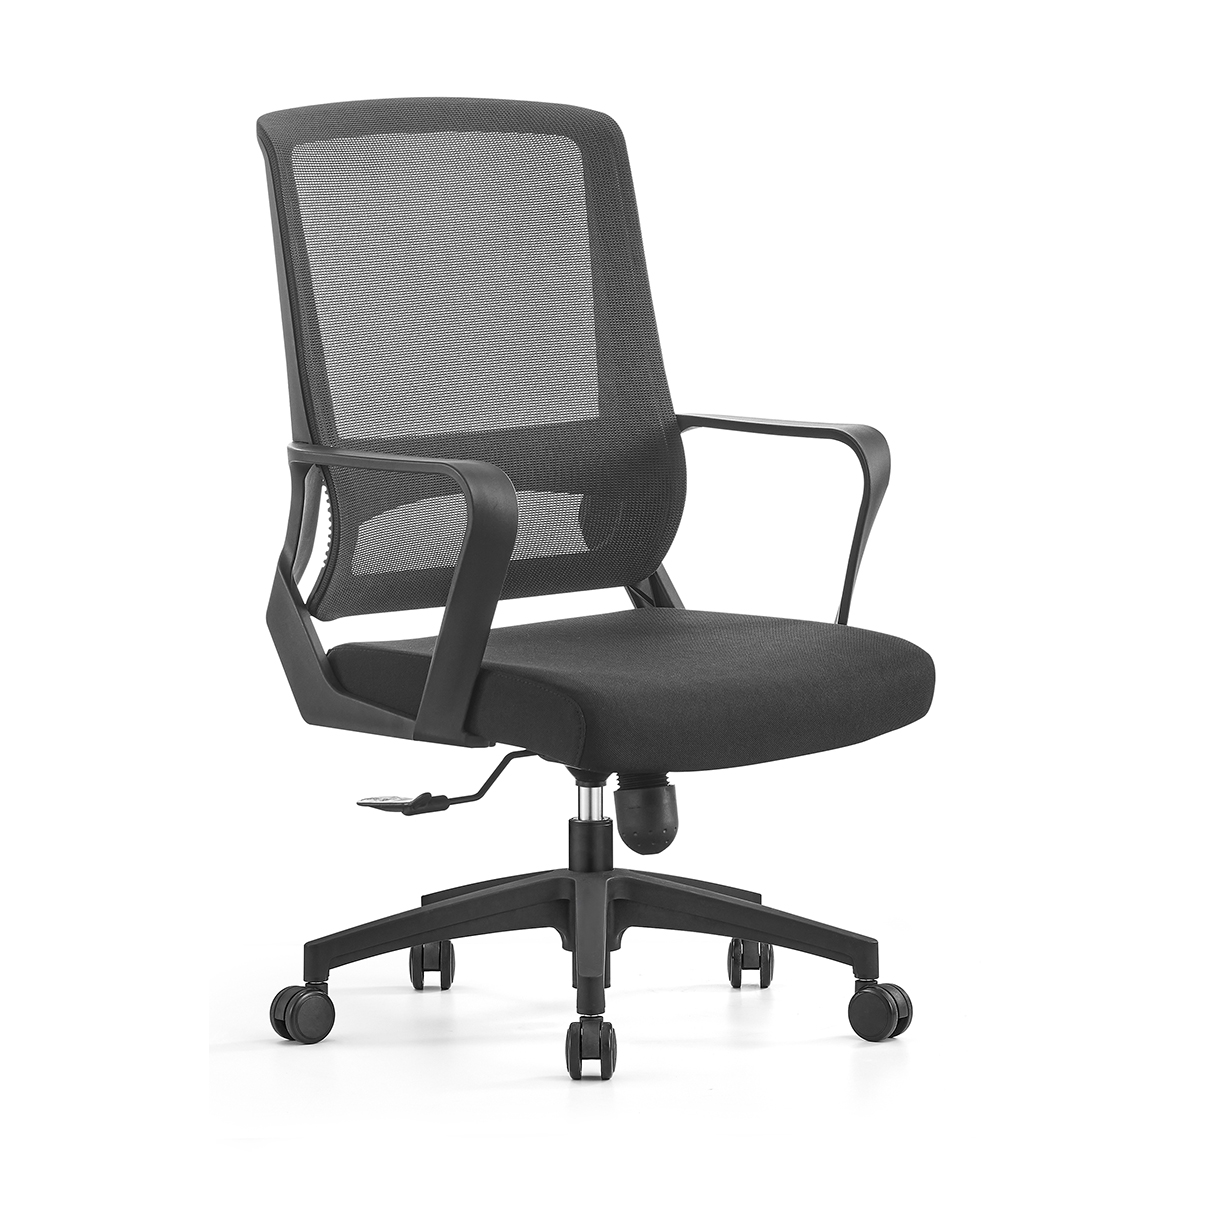 High Quality Best Mesh Inexpensive Office Chair For Long Hours Featured Image